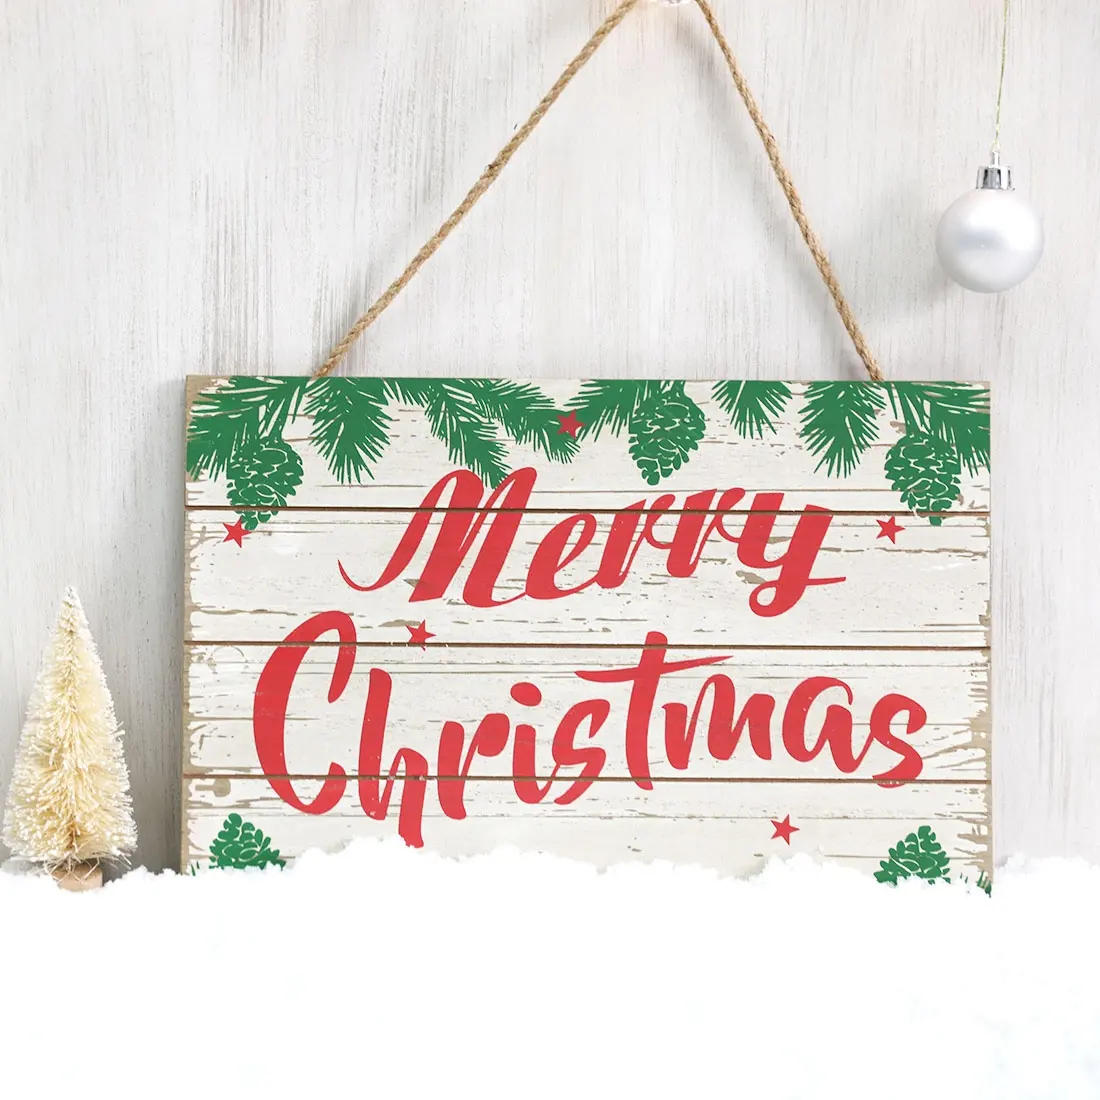 Christmas wooden wall plaque hanging ornaments wood board merry christmas signs for home festival wall garden decoration